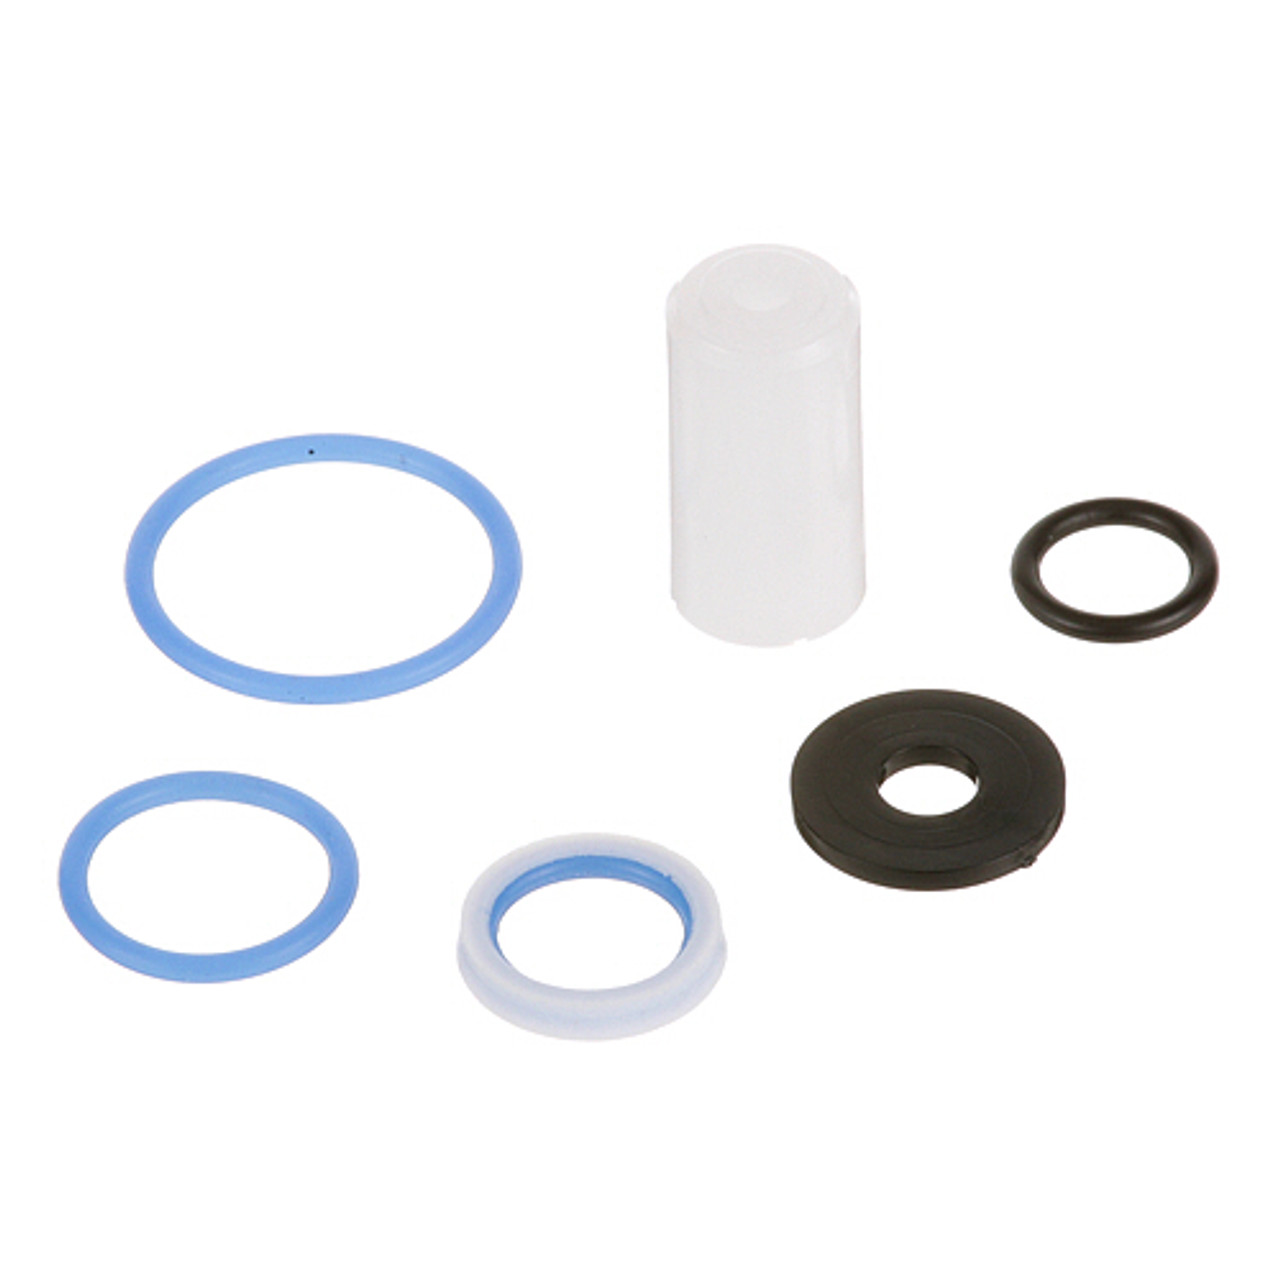 Server Products 82533 - Parts Kit, Spare